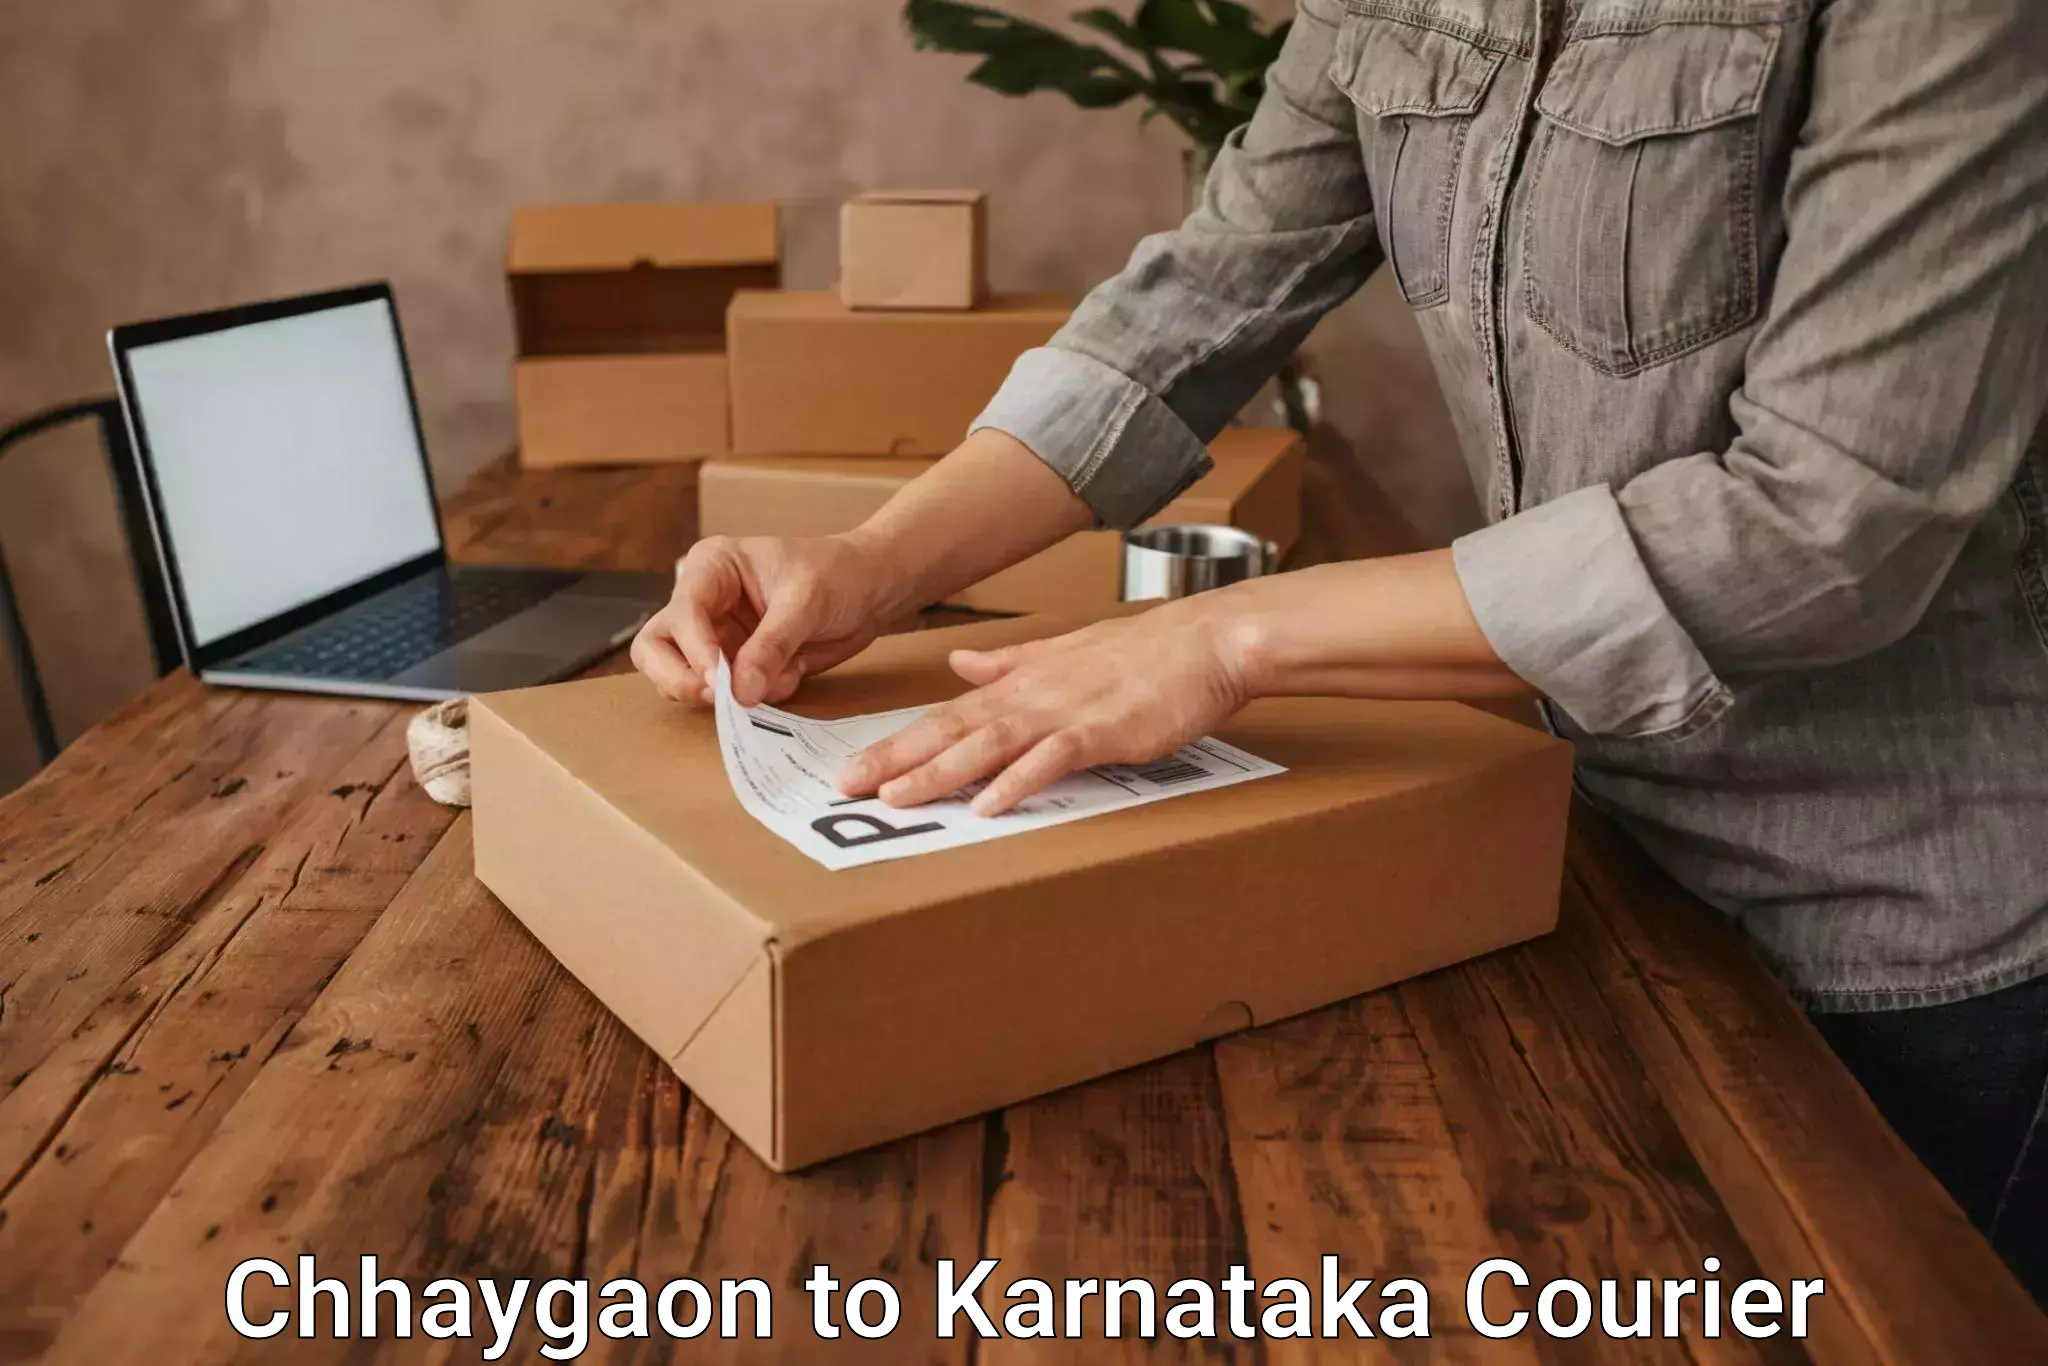 Doorstep delivery service Chhaygaon to Gokak